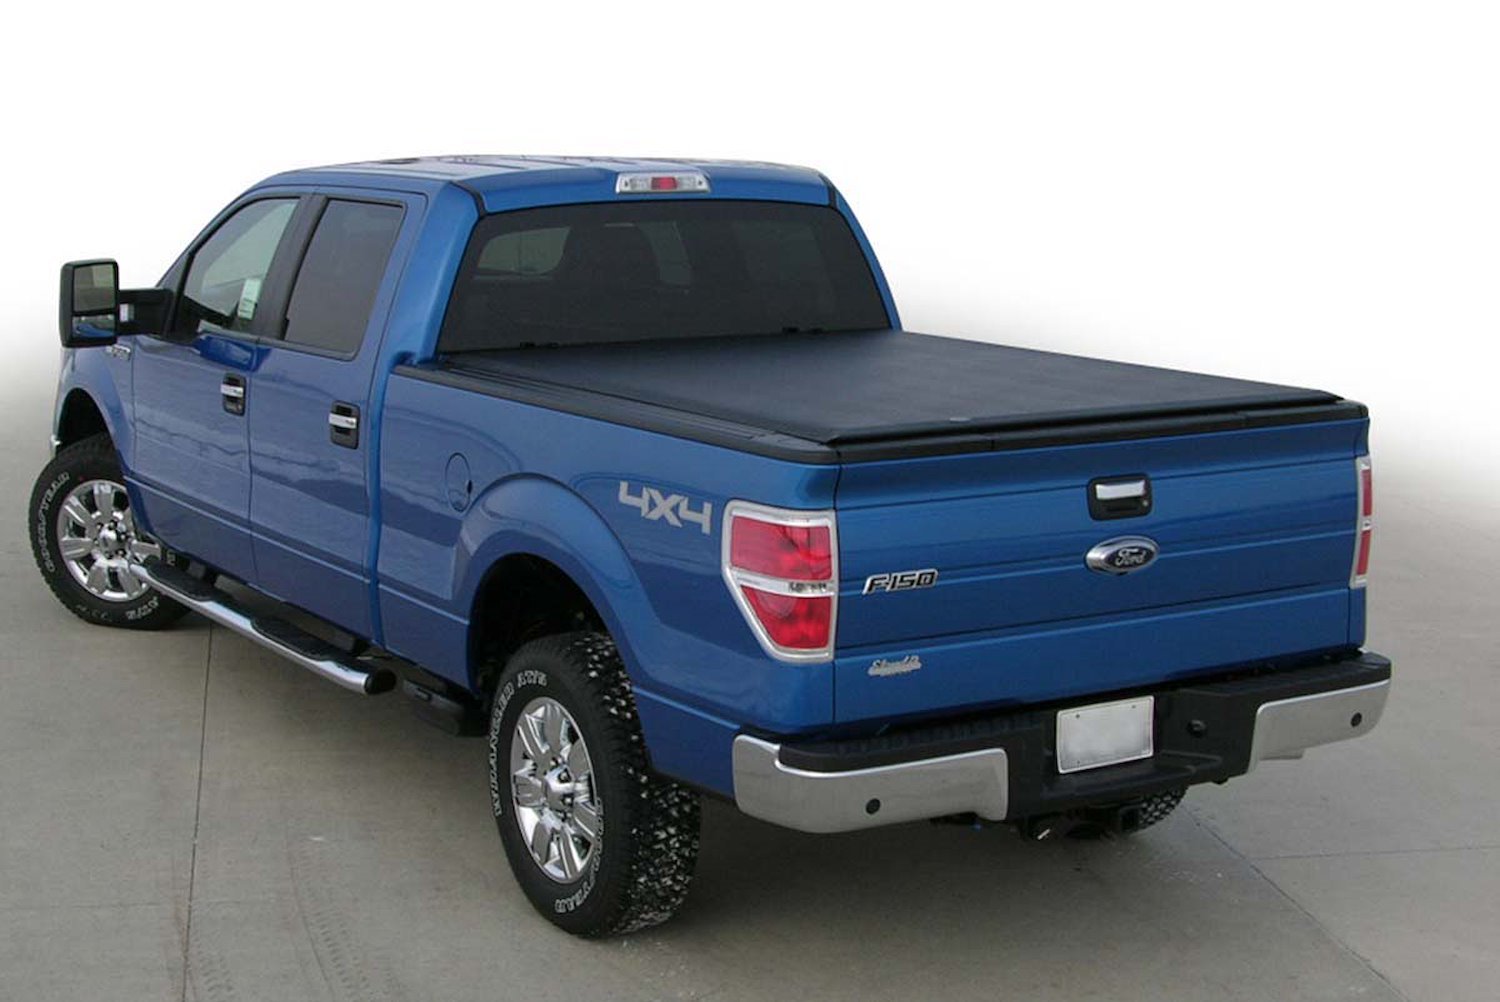 LORADO Roll-Up Tonneau Cover, 2004-2014 Ford F-150 (Except Heritage), 2006-2008 Lincoln Mark LT, with 5 ft. 6 in. Bed